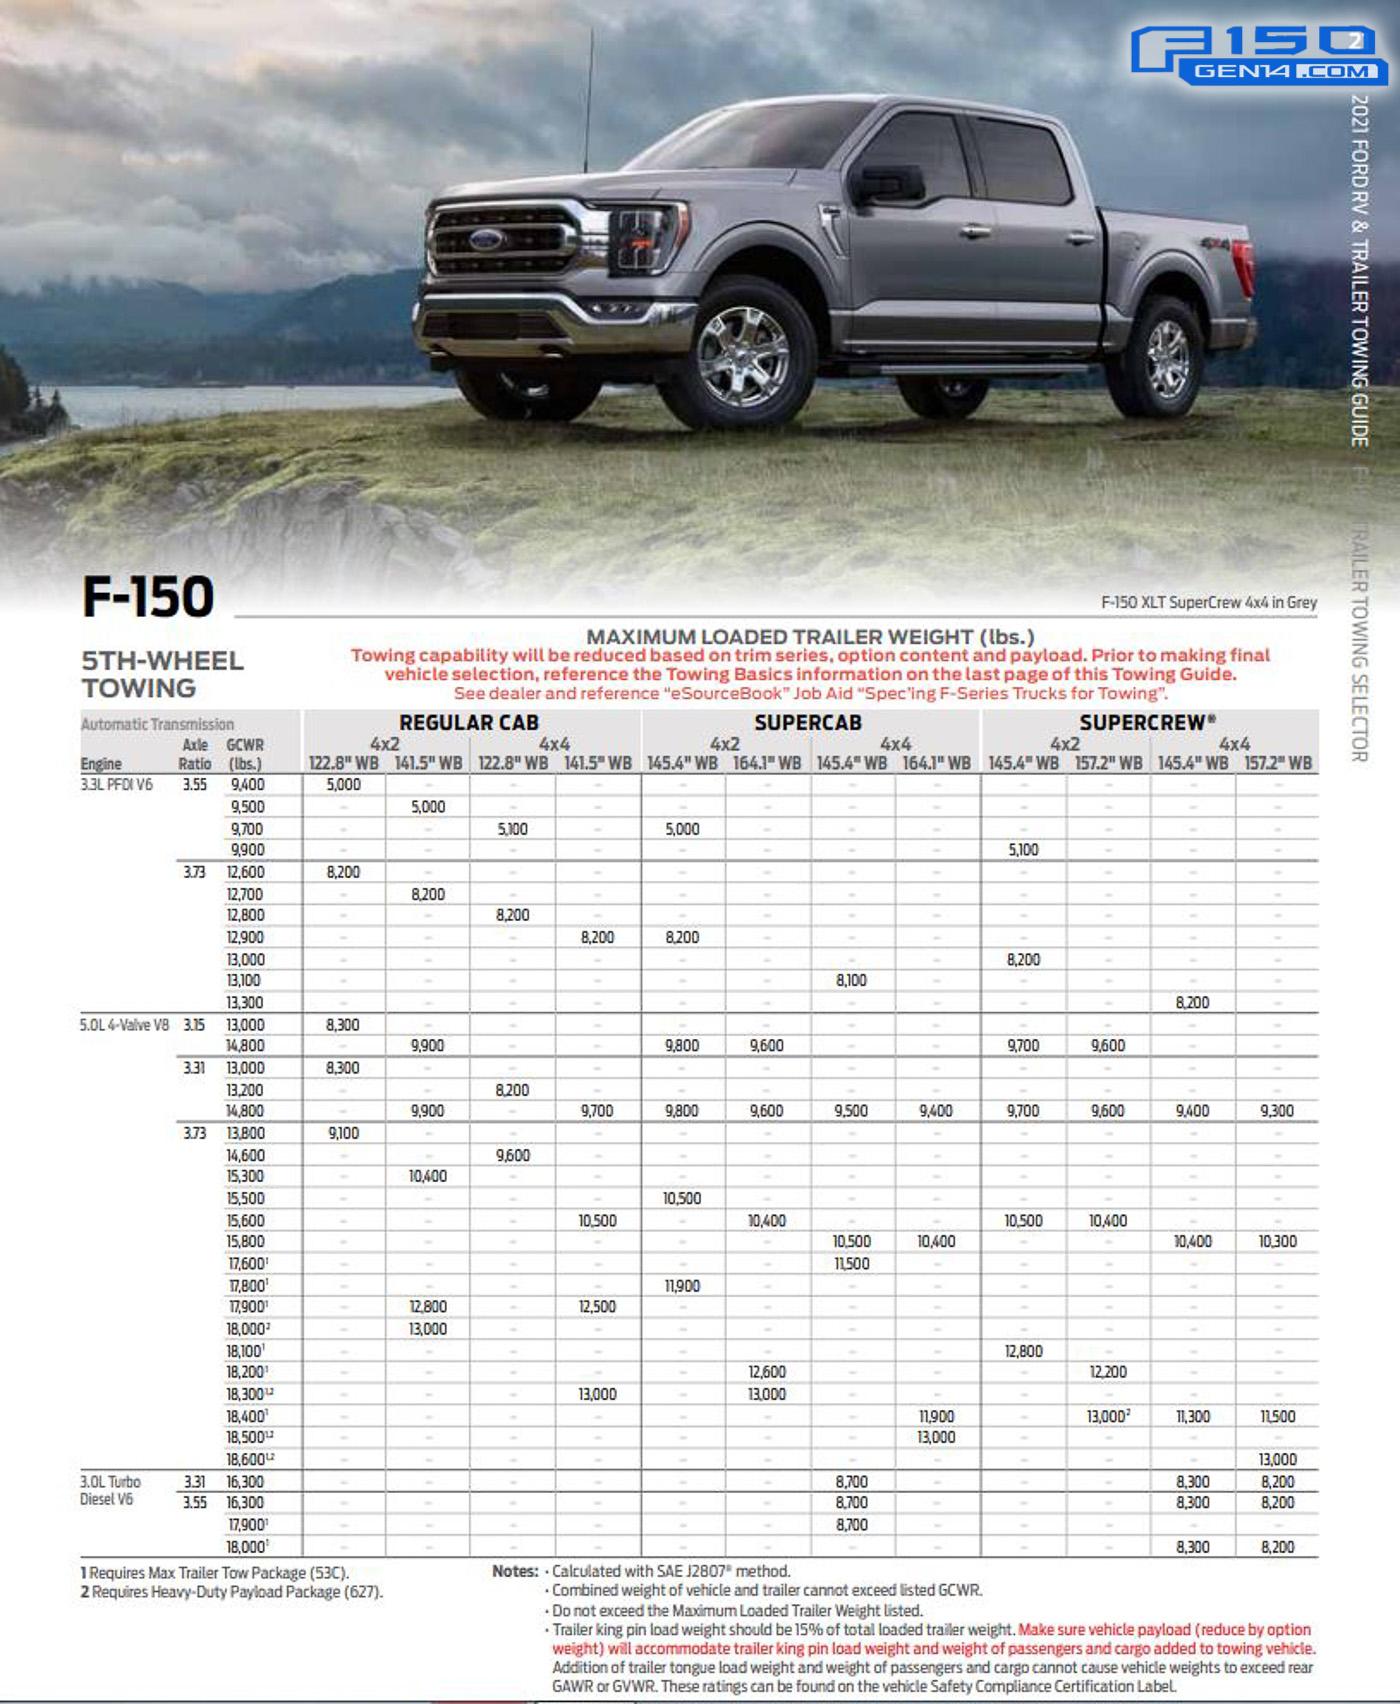 2021 F150 Towing, 5th Wheel Towing and Cargo / Payload Capacity